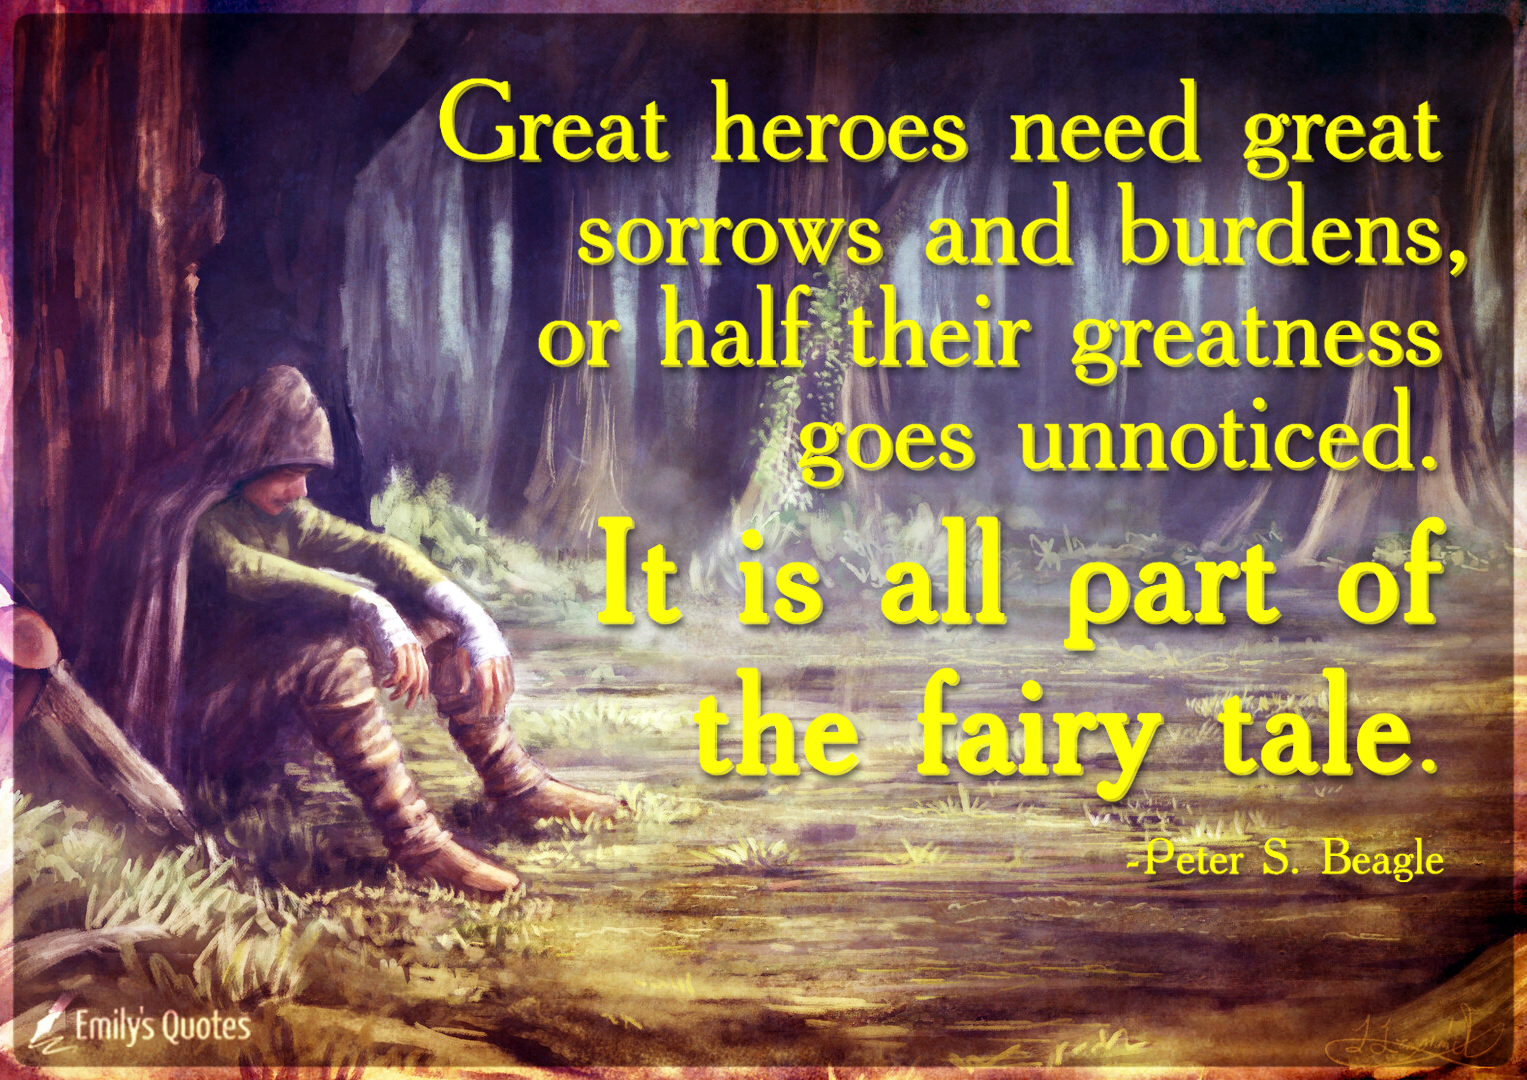 Great heroes need great sorrows and burdens, or half their greatness goes unnoticed